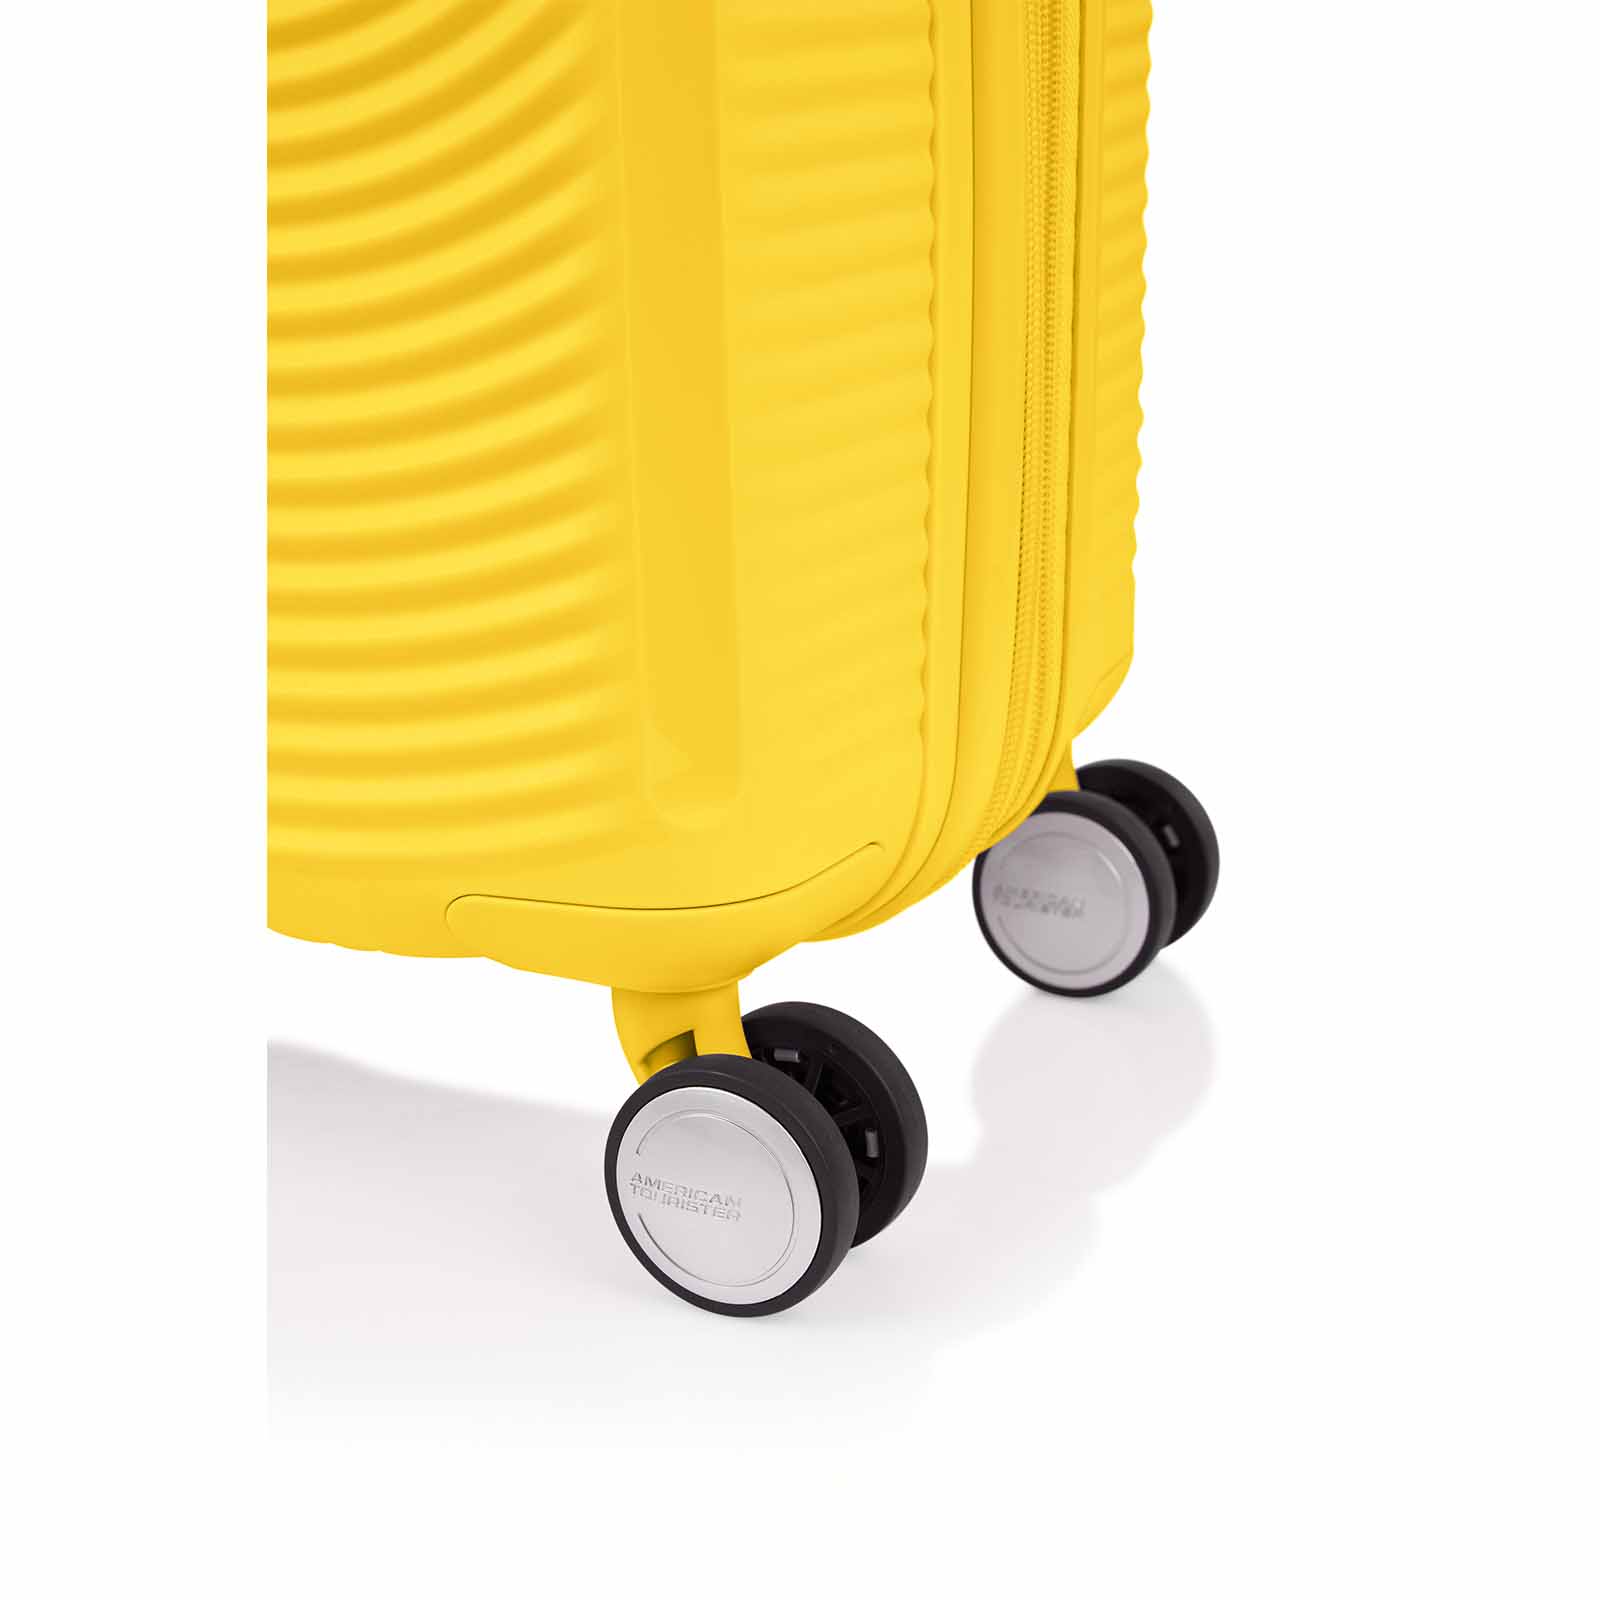 American-Tourister-Curio-2-55cm-Carry-On-Suitcase-Golden-Yellow-Wheels